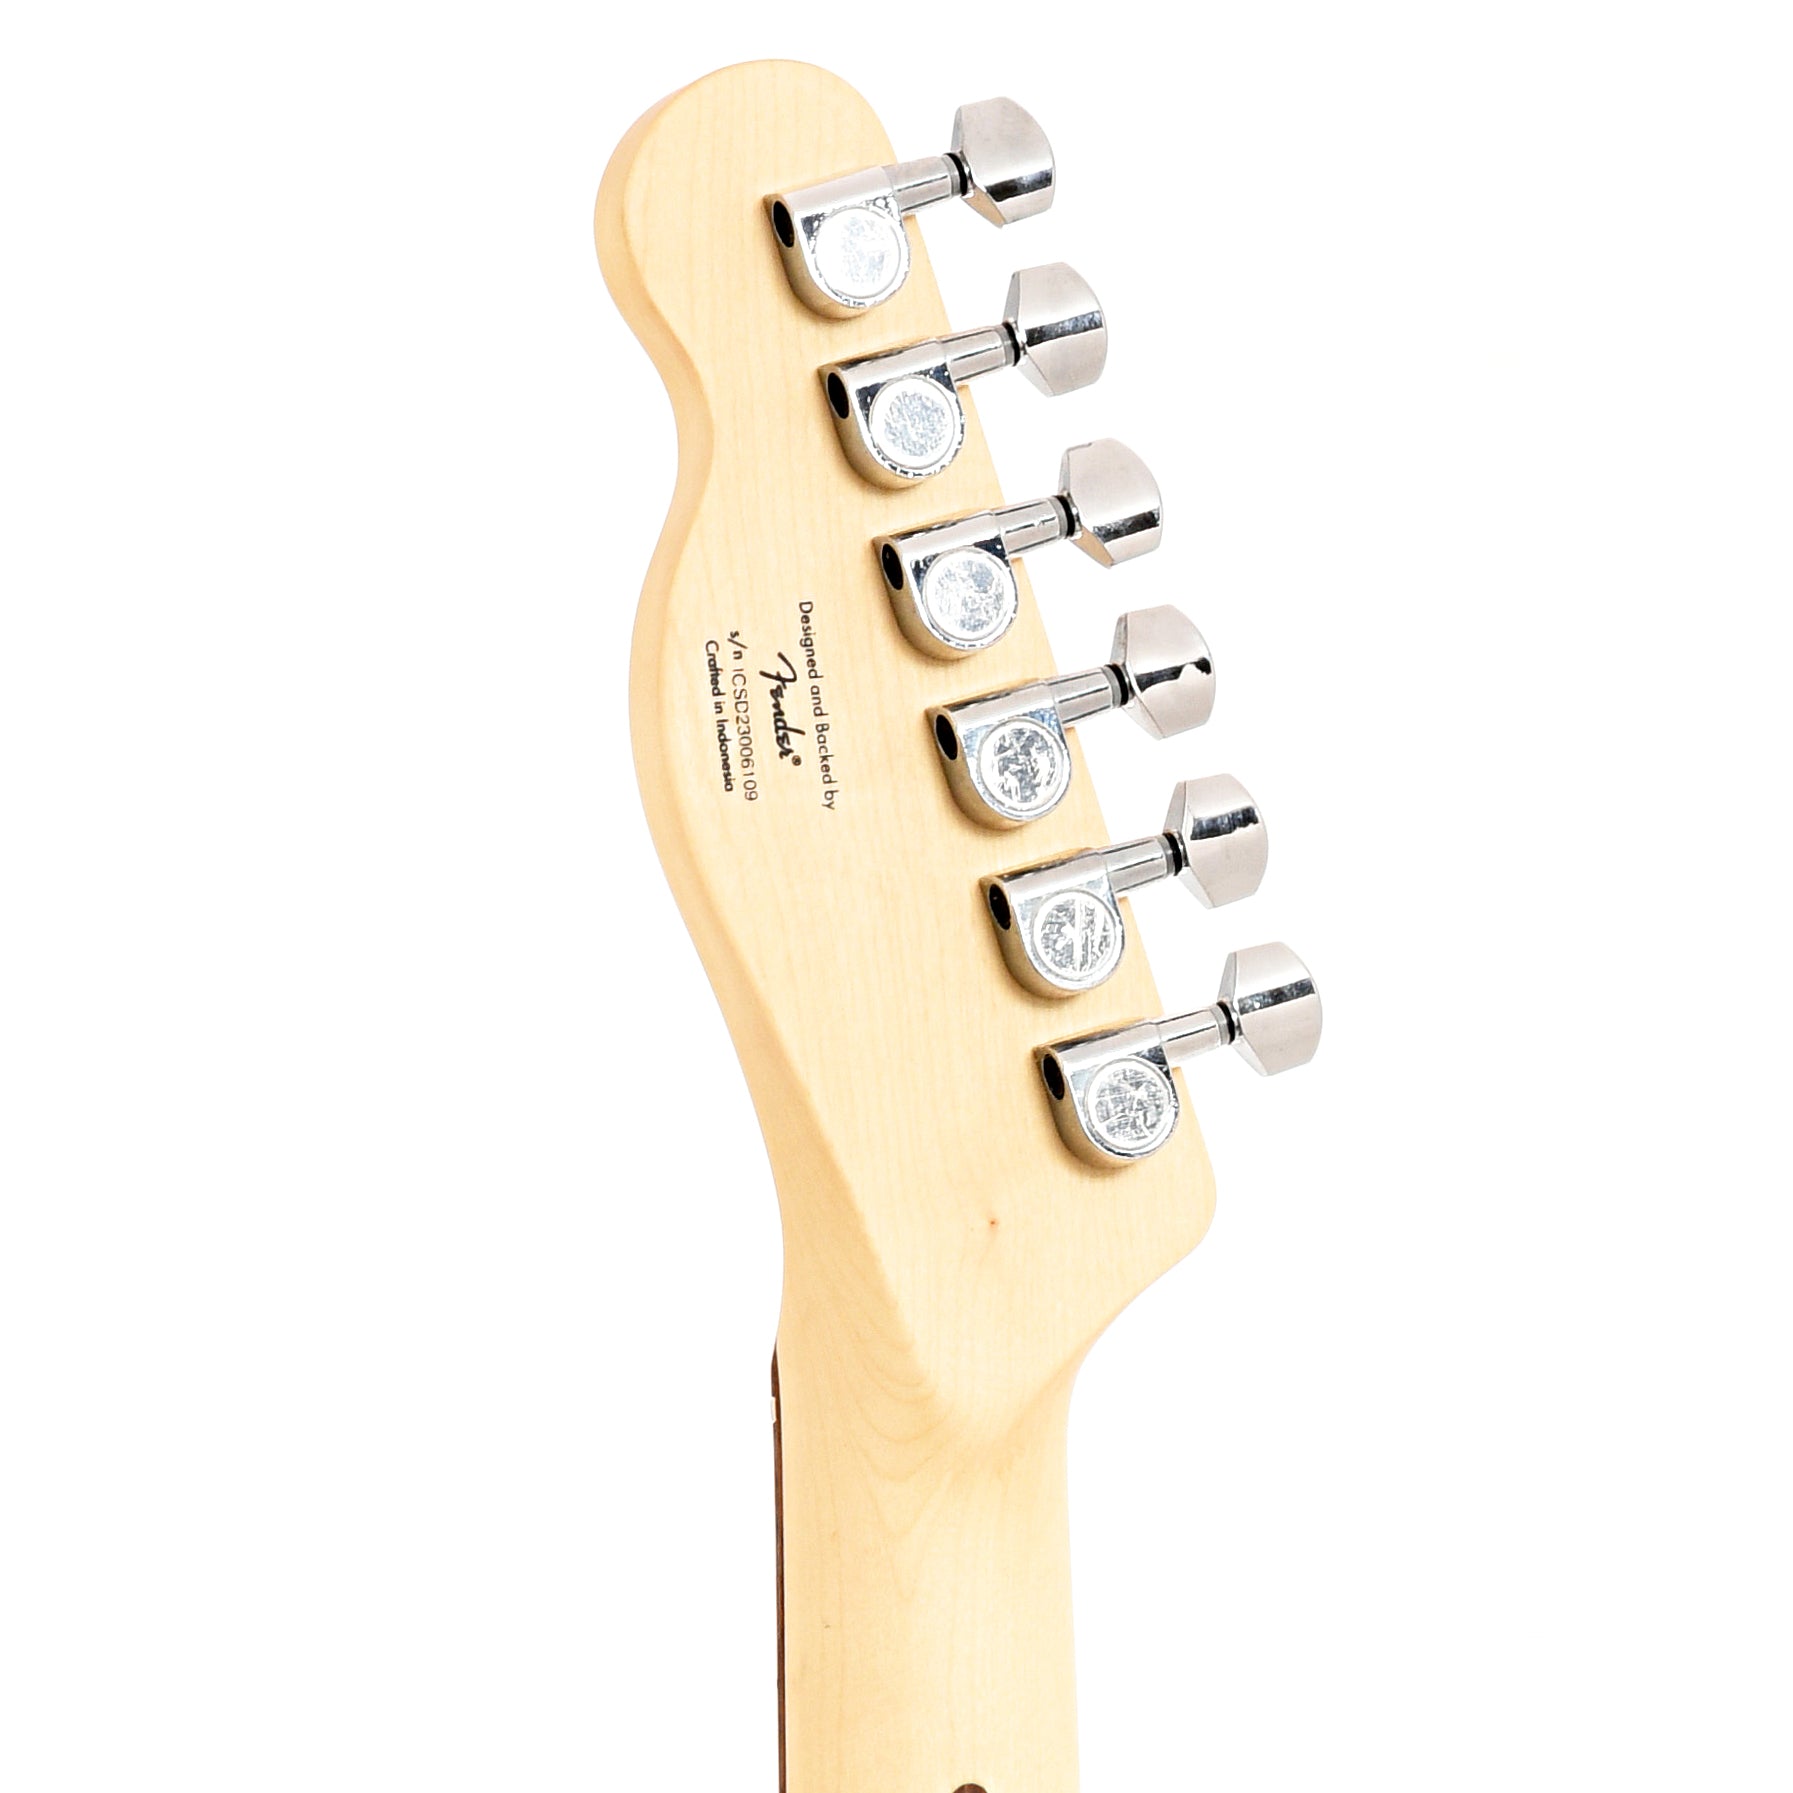 Back headstock of Squier Sonic Esquire H, Ultraviolet